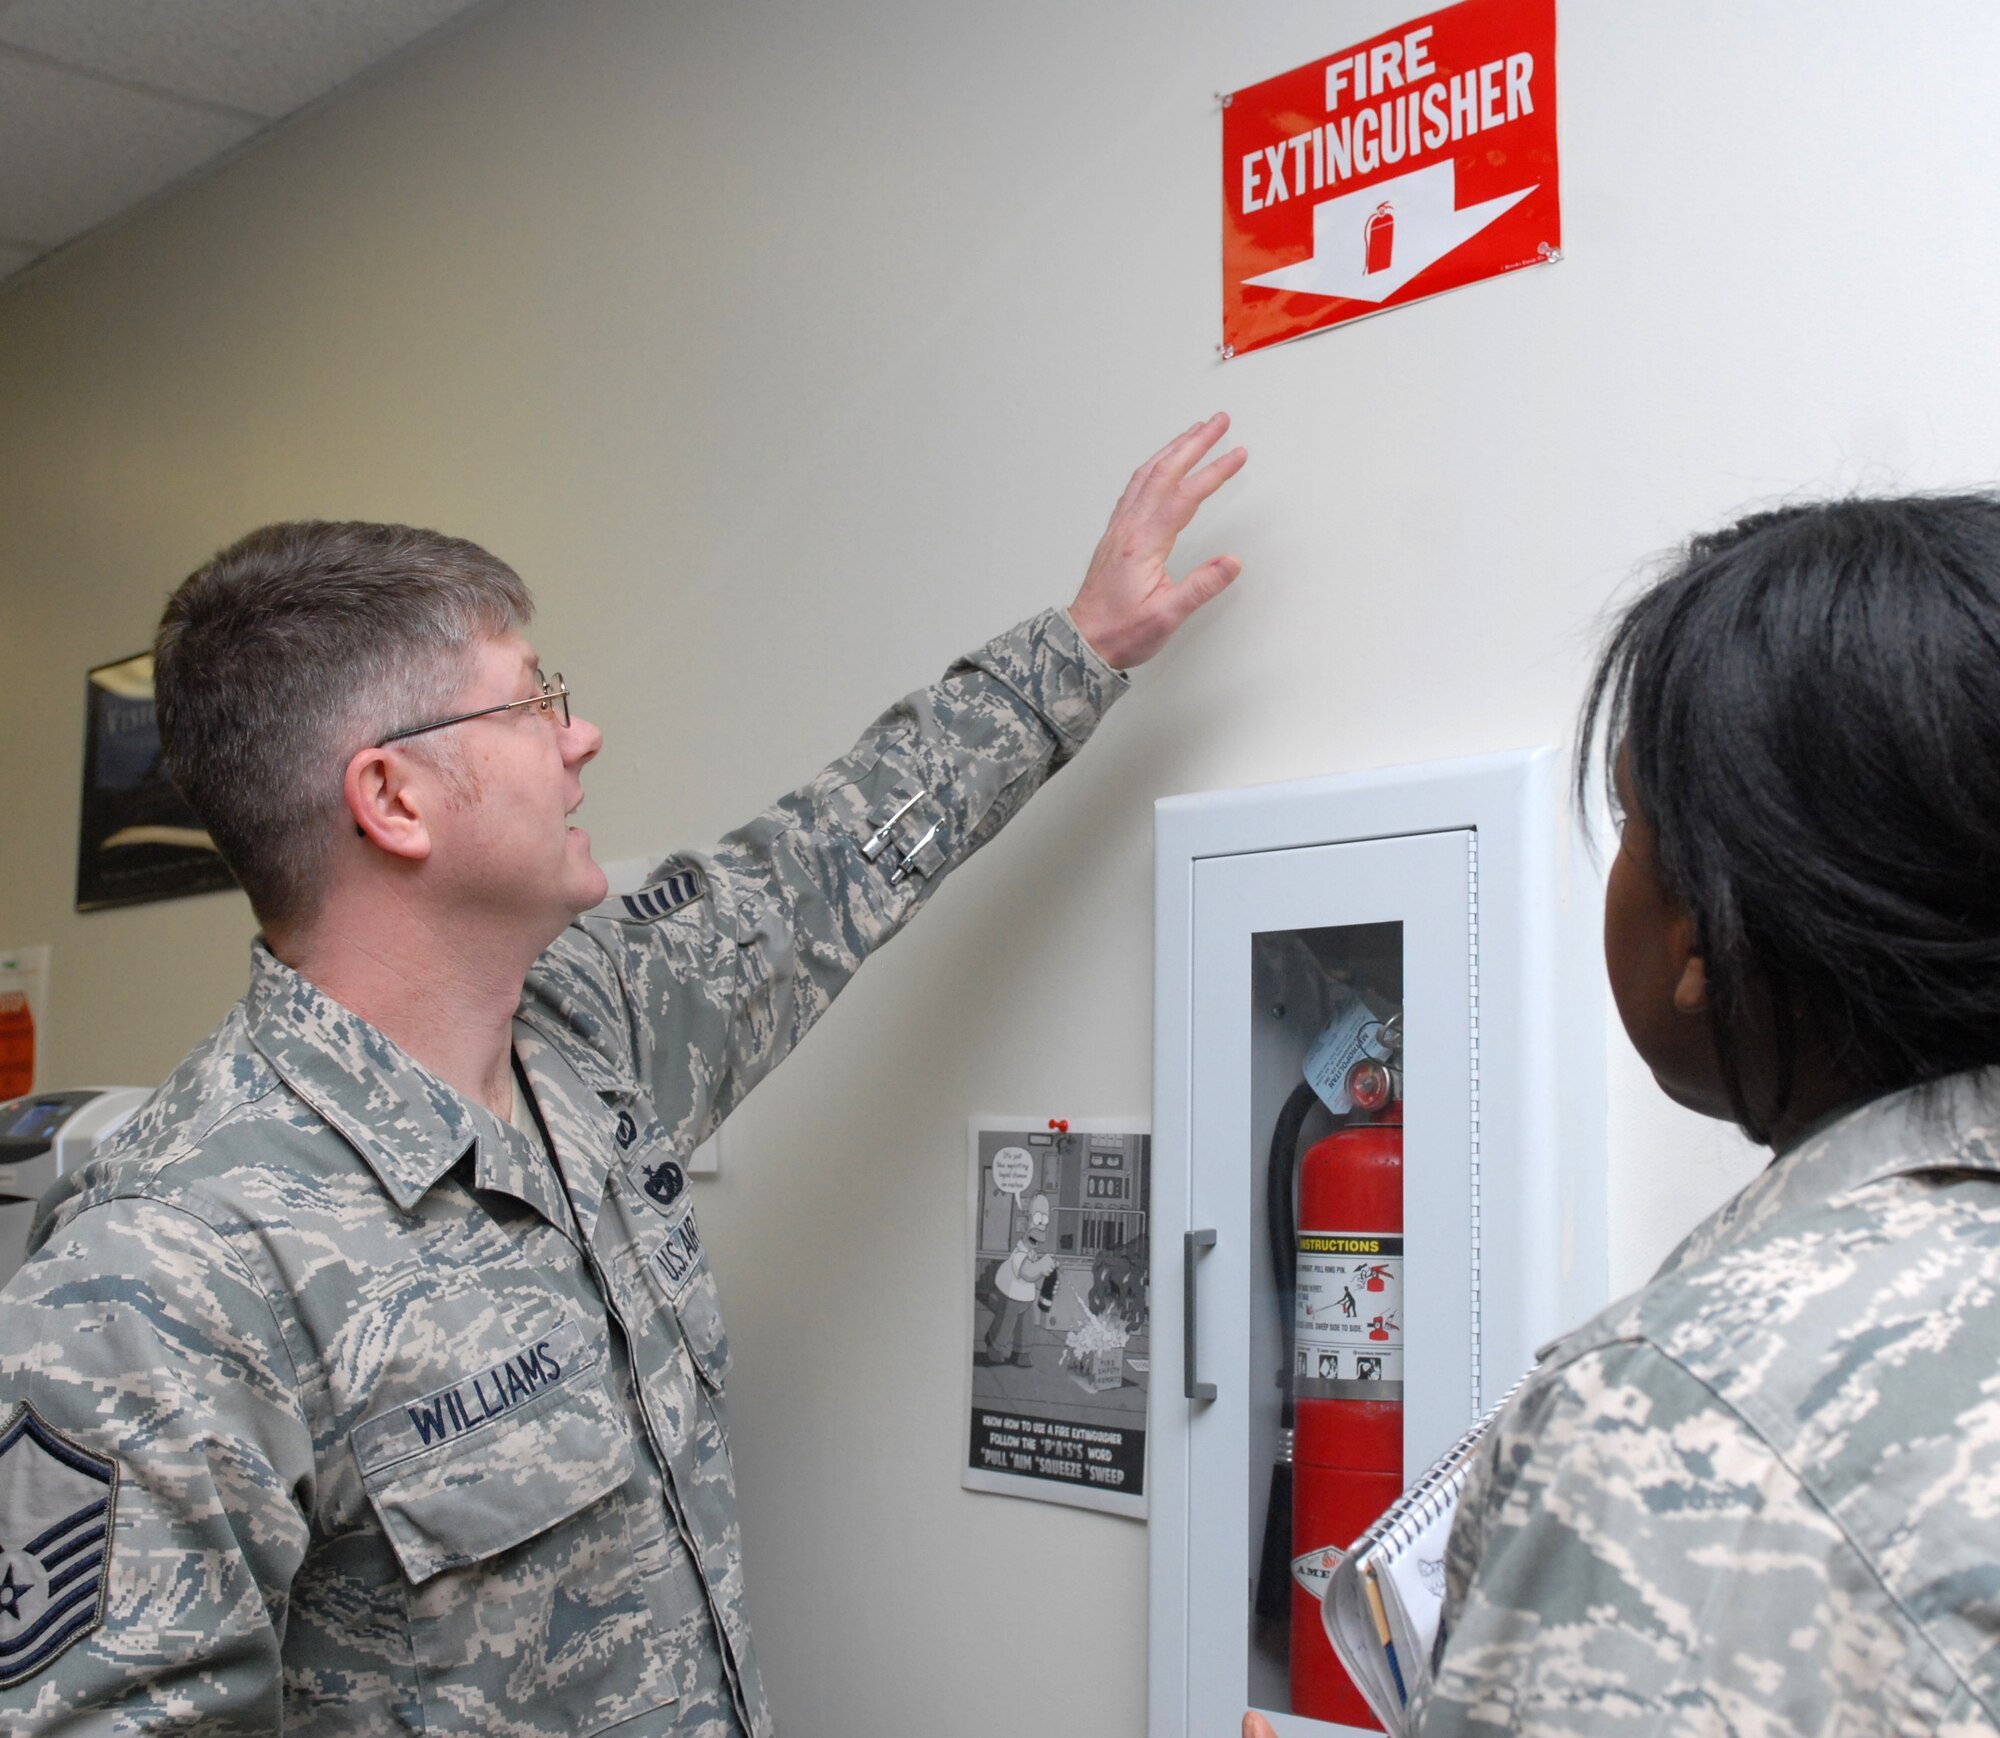 Master Sgt. Donald Williams, 19th Airlift Wing Safety ground safety superintendent, discussed fire extinguisher markings with Staff Sgt. Tamara Burks, 19th Comptroller Squadron budget analyst, during a safety inspection. (U.S. Air Force photo by Senior Airman Christine Clark)